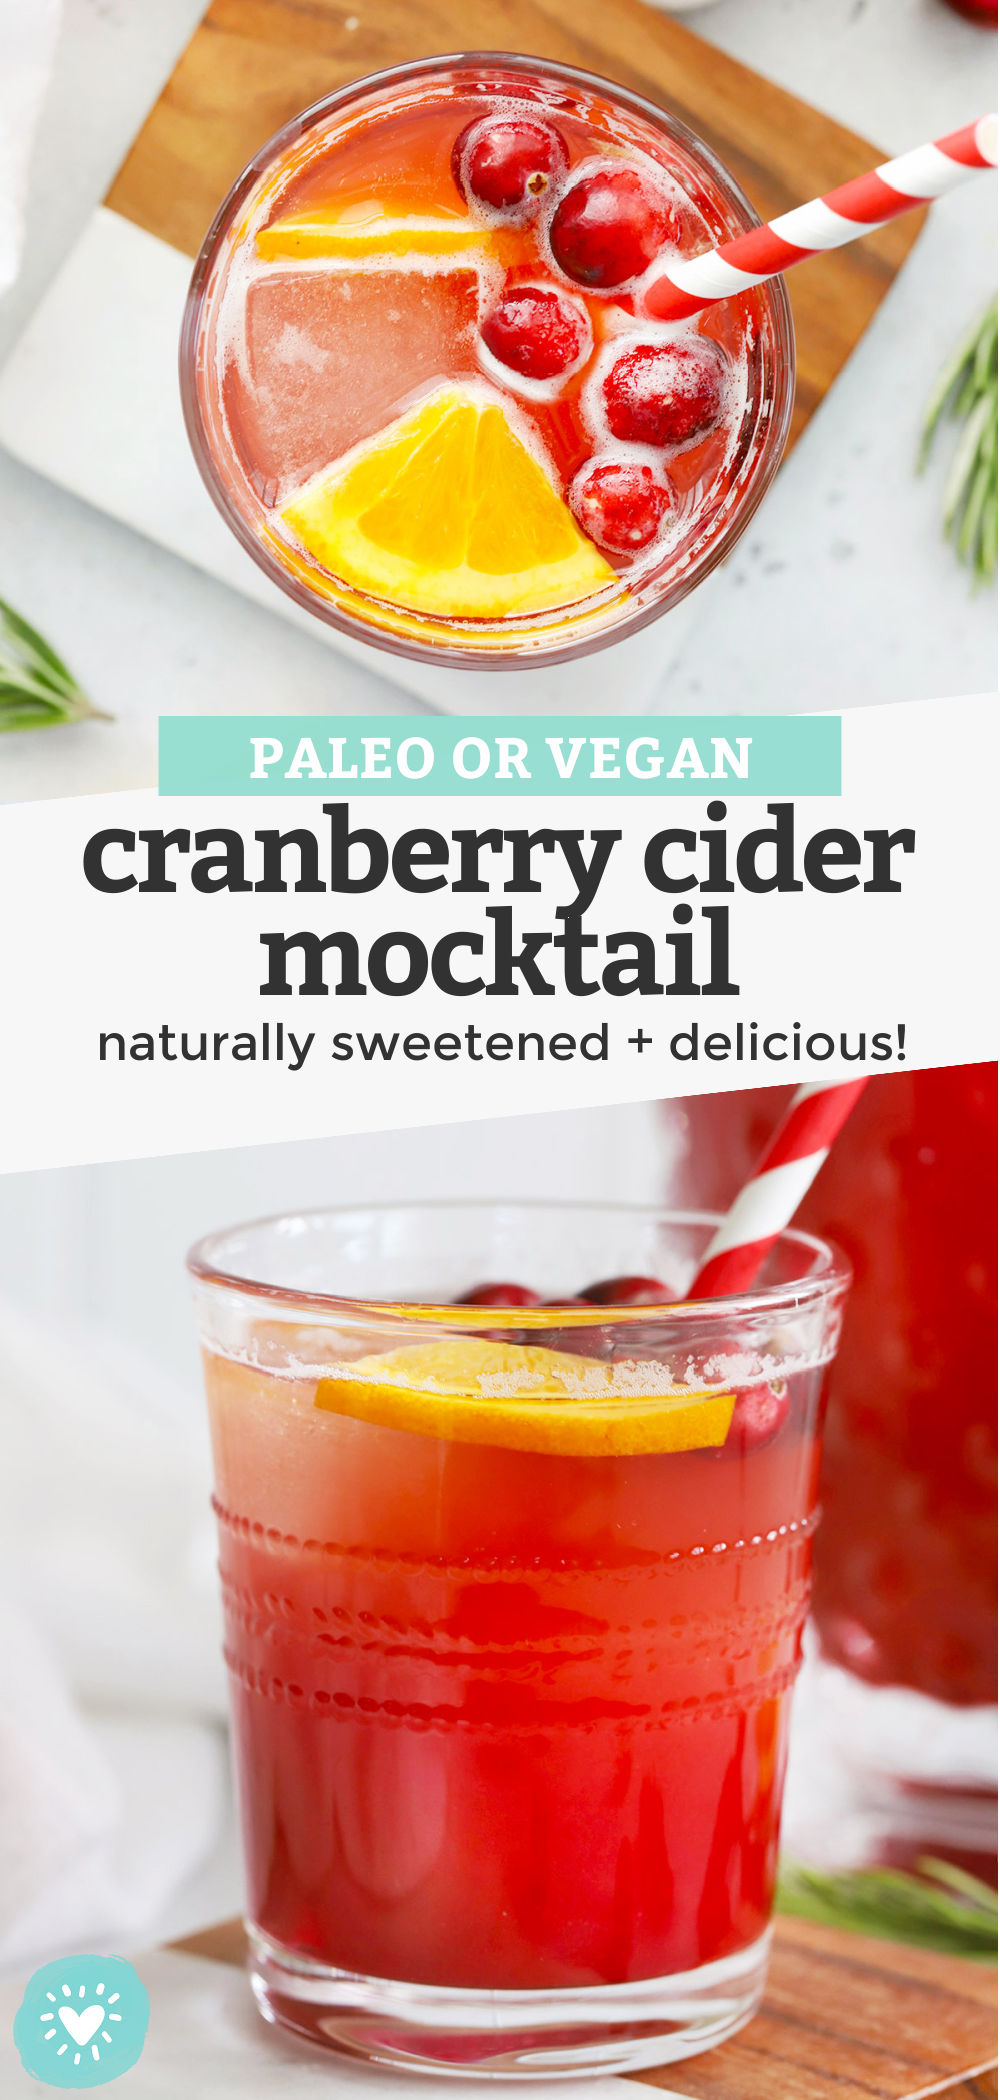 Cranberry Cider Mocktail - This naturally-sweetened fall mocktail recipe is perfect for your holiday table or holiday parties! Make just one or two glasses, or a whole pitcher to enjoy! (Paleo + Vegan) // Paleo Mocktail // Non Alcoholic Cranberry Cider Mocktail // Non Alcoholic Cocktail // Cider Mocktail // Cranberry Mocktail // Fall Mocktail // Non Alcoholic Party Drink #thanskgiving #mocktail #paleo #vegan #cranberries